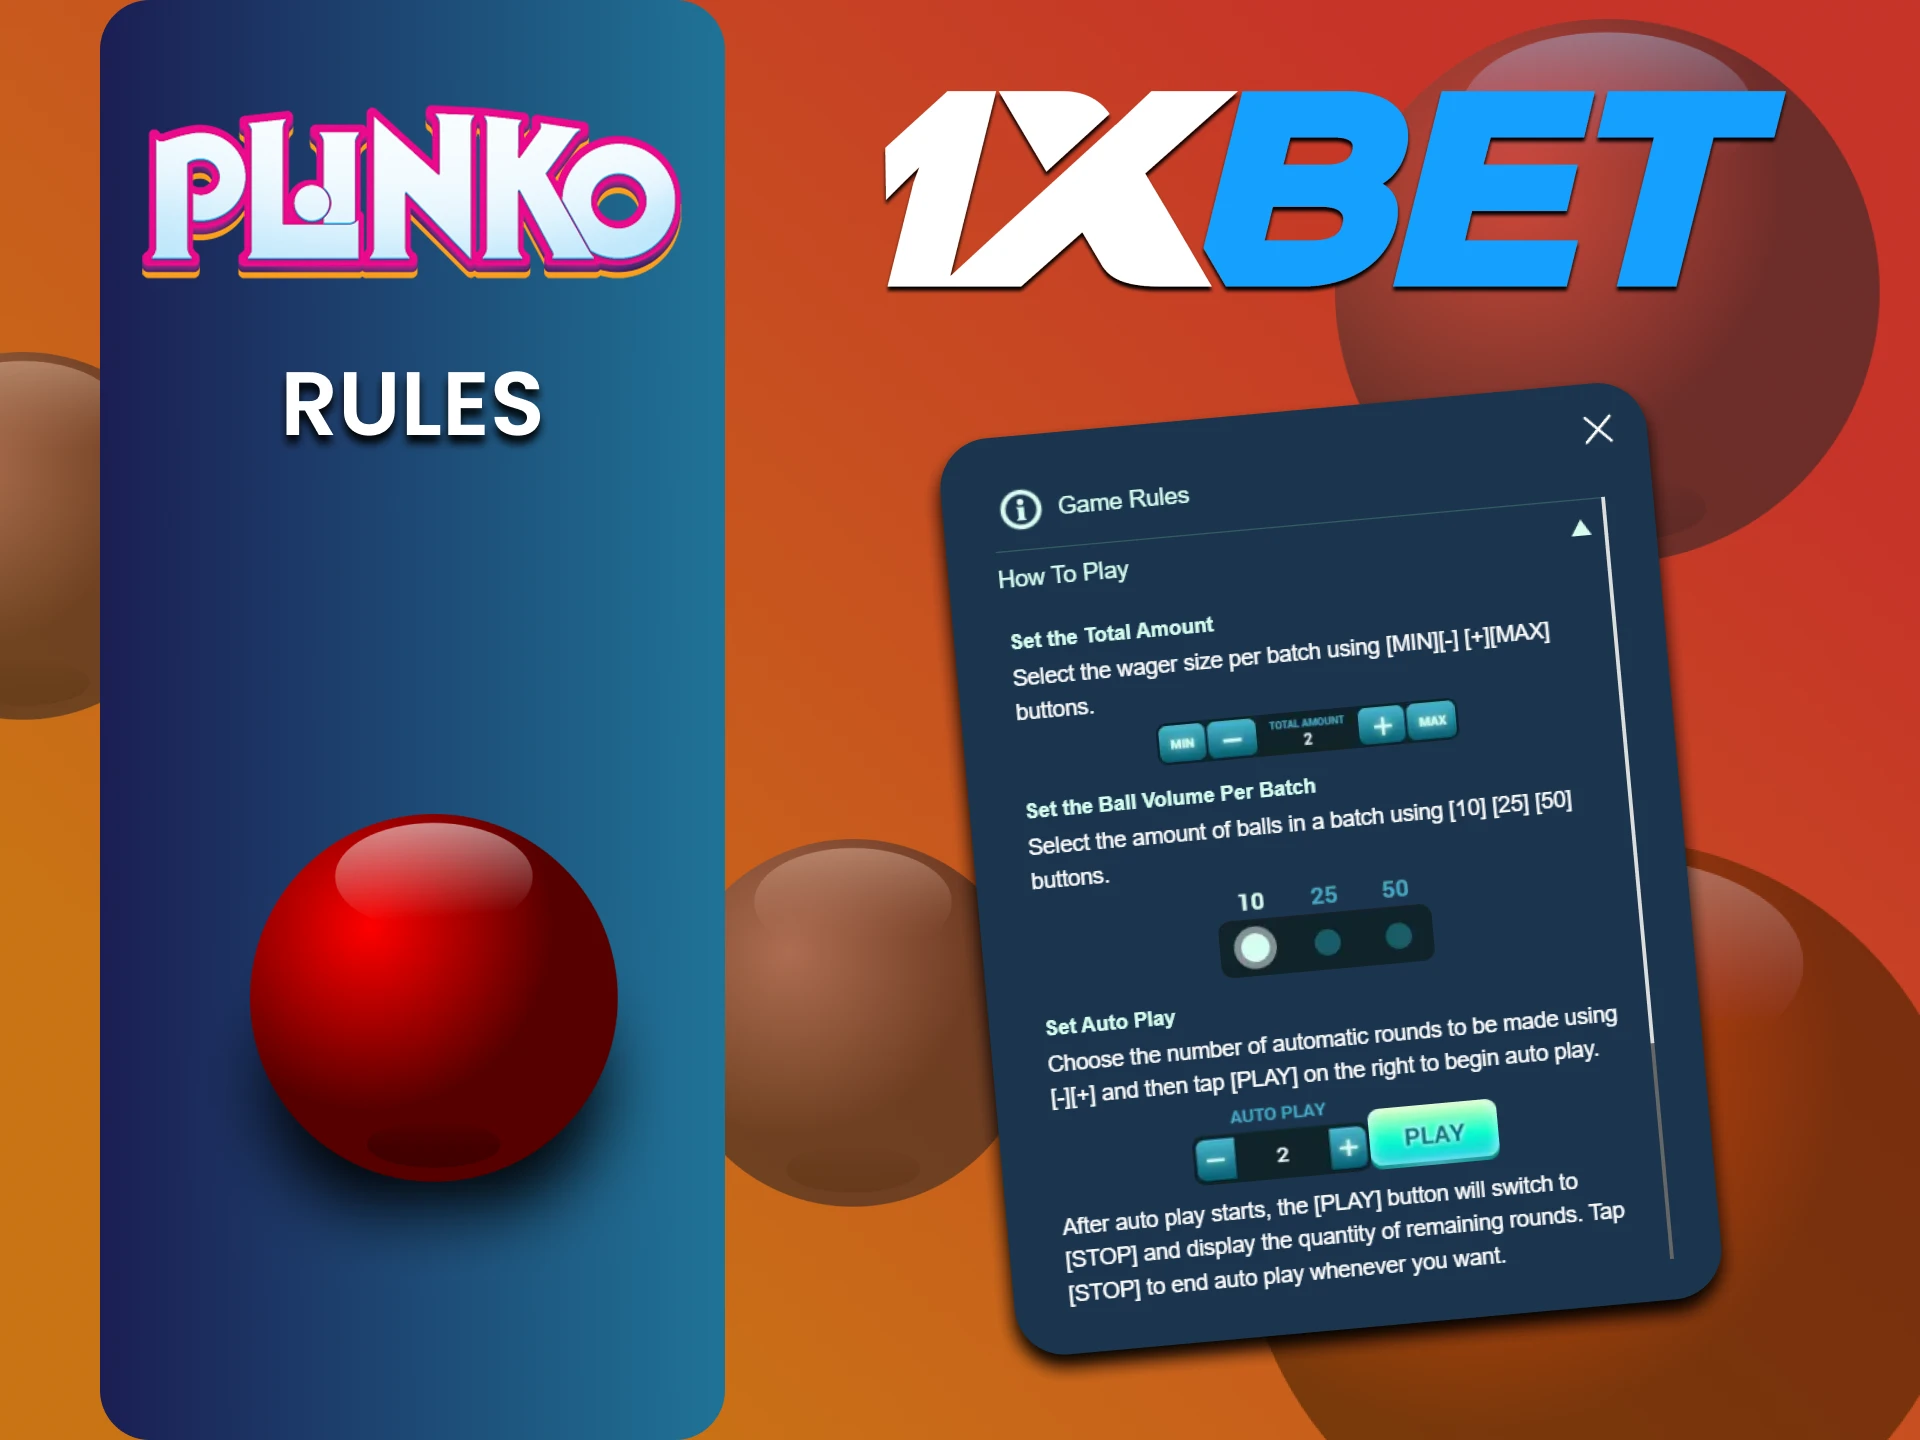 Find out about the rules of the Plinko game on 1xbet.